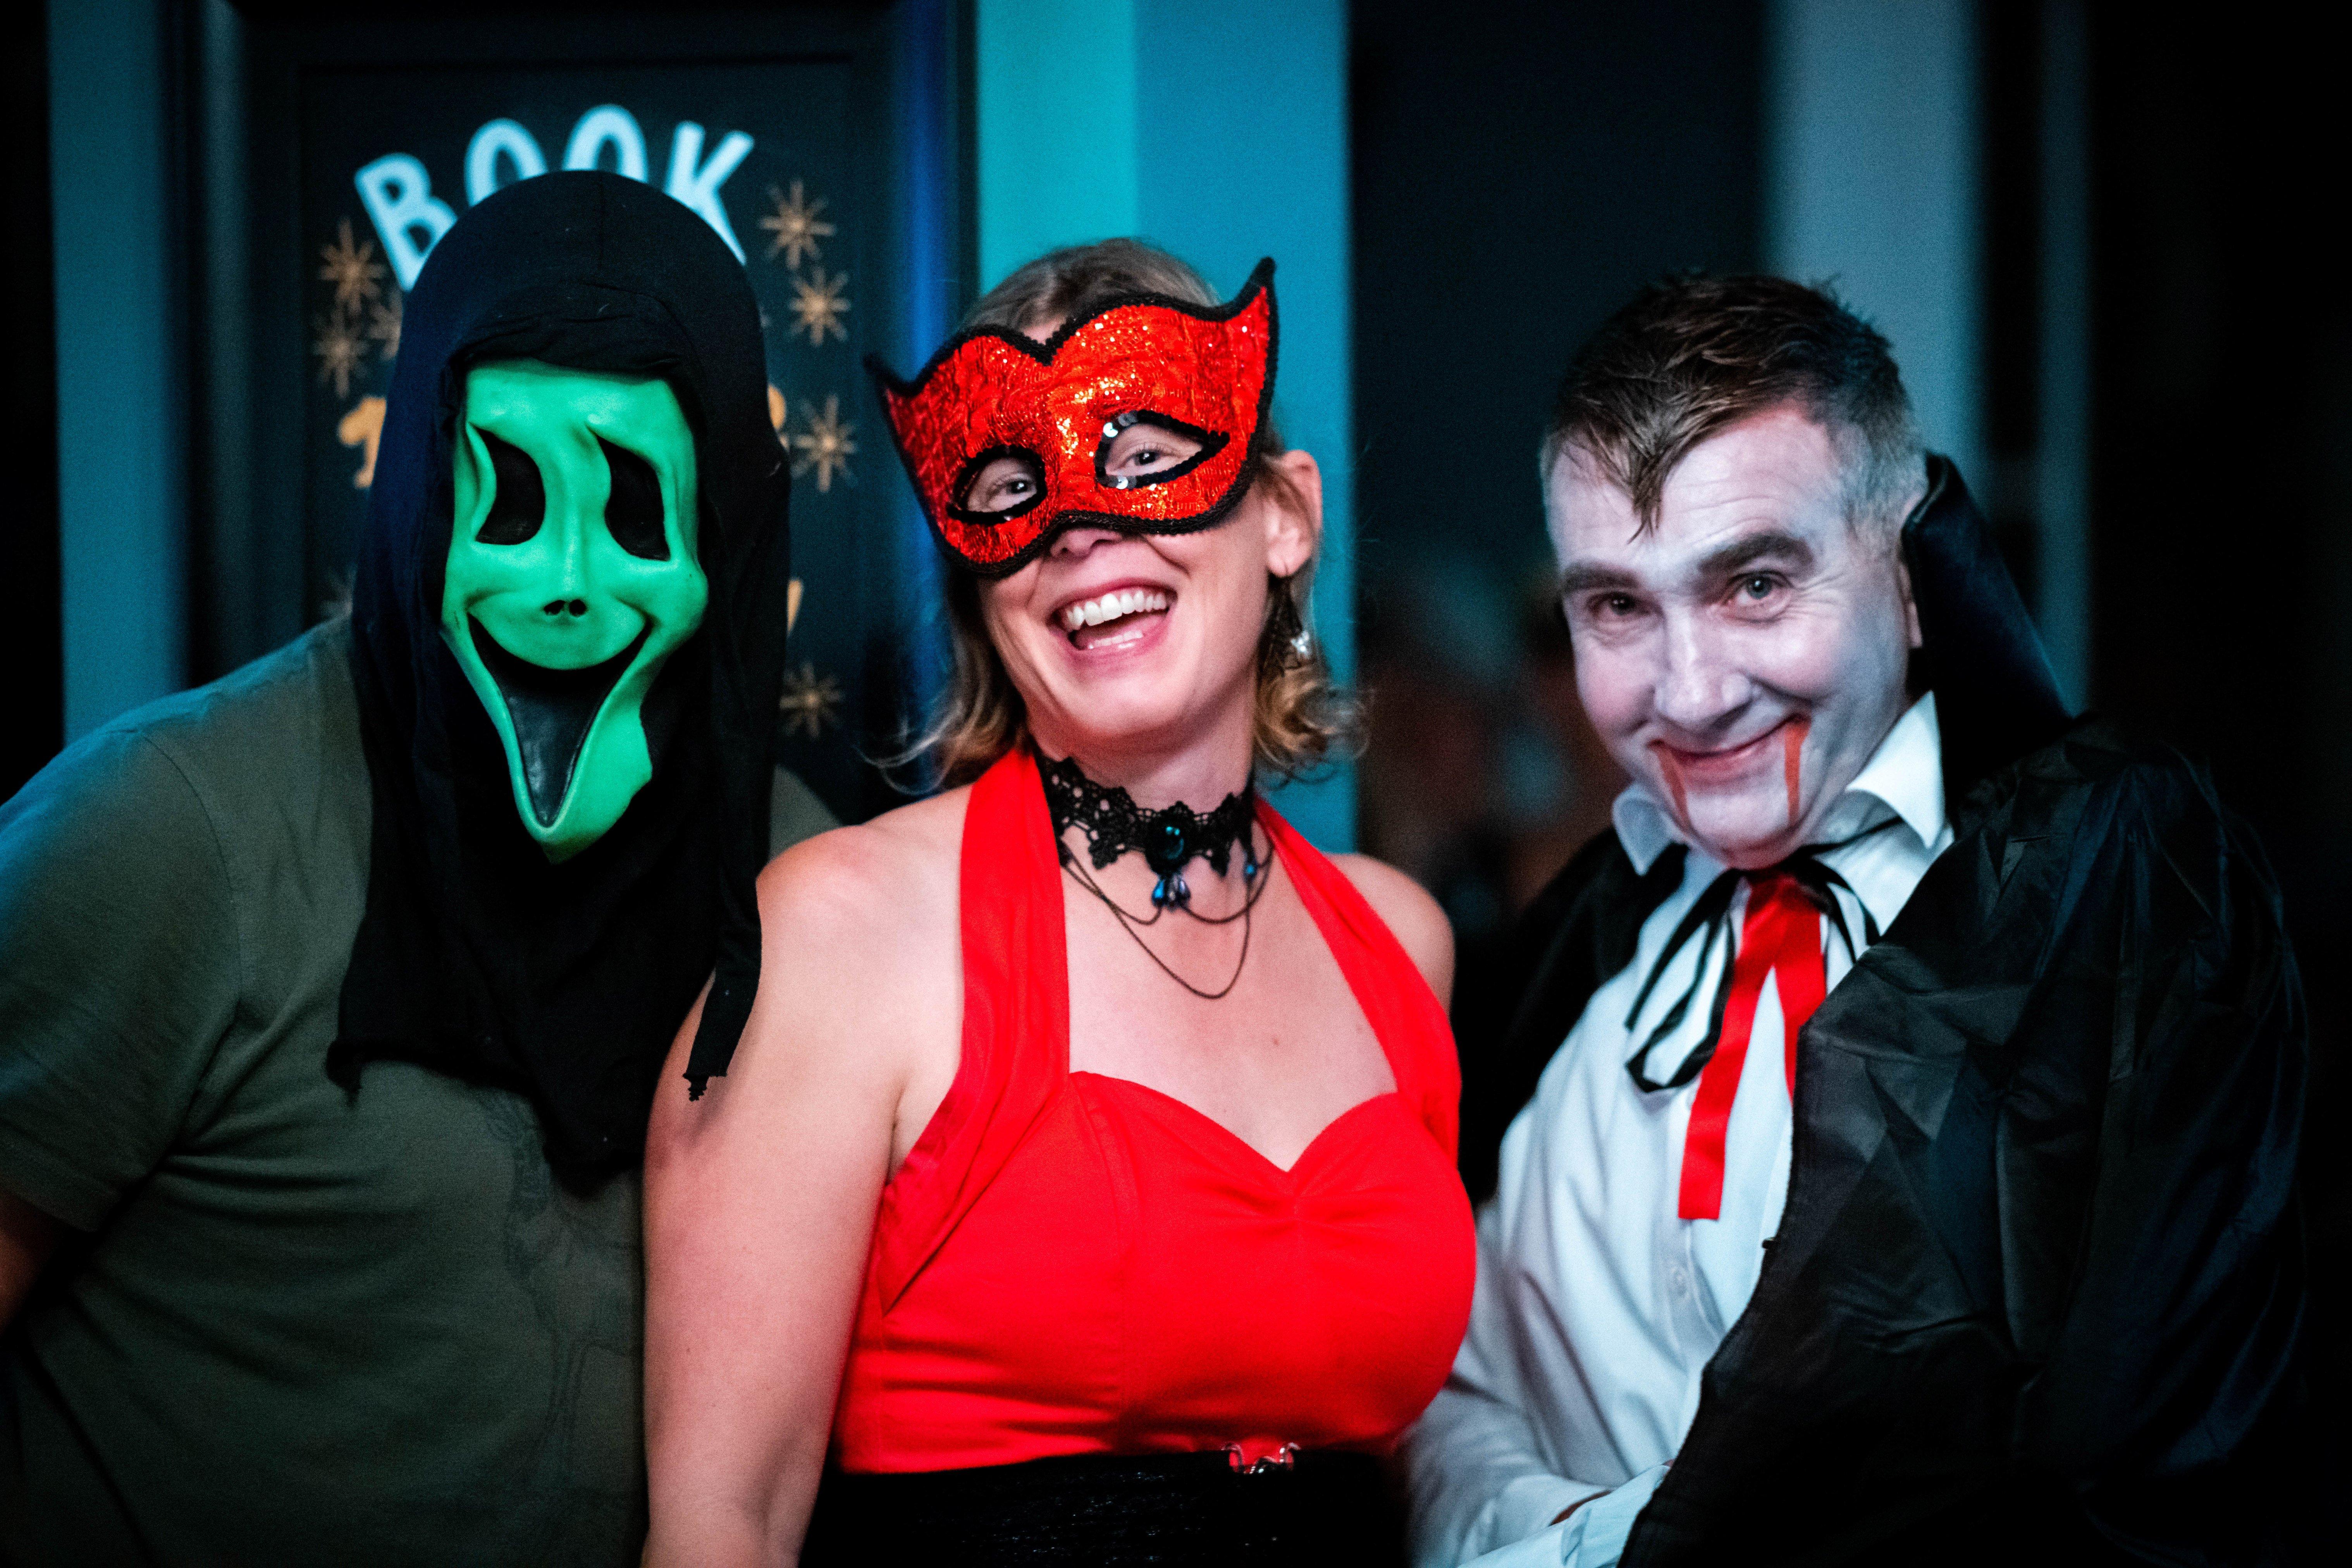 A great night was had by all at the Murdoch’s Crazy Eyes Hallowe'en show. Pictures: Guild Care